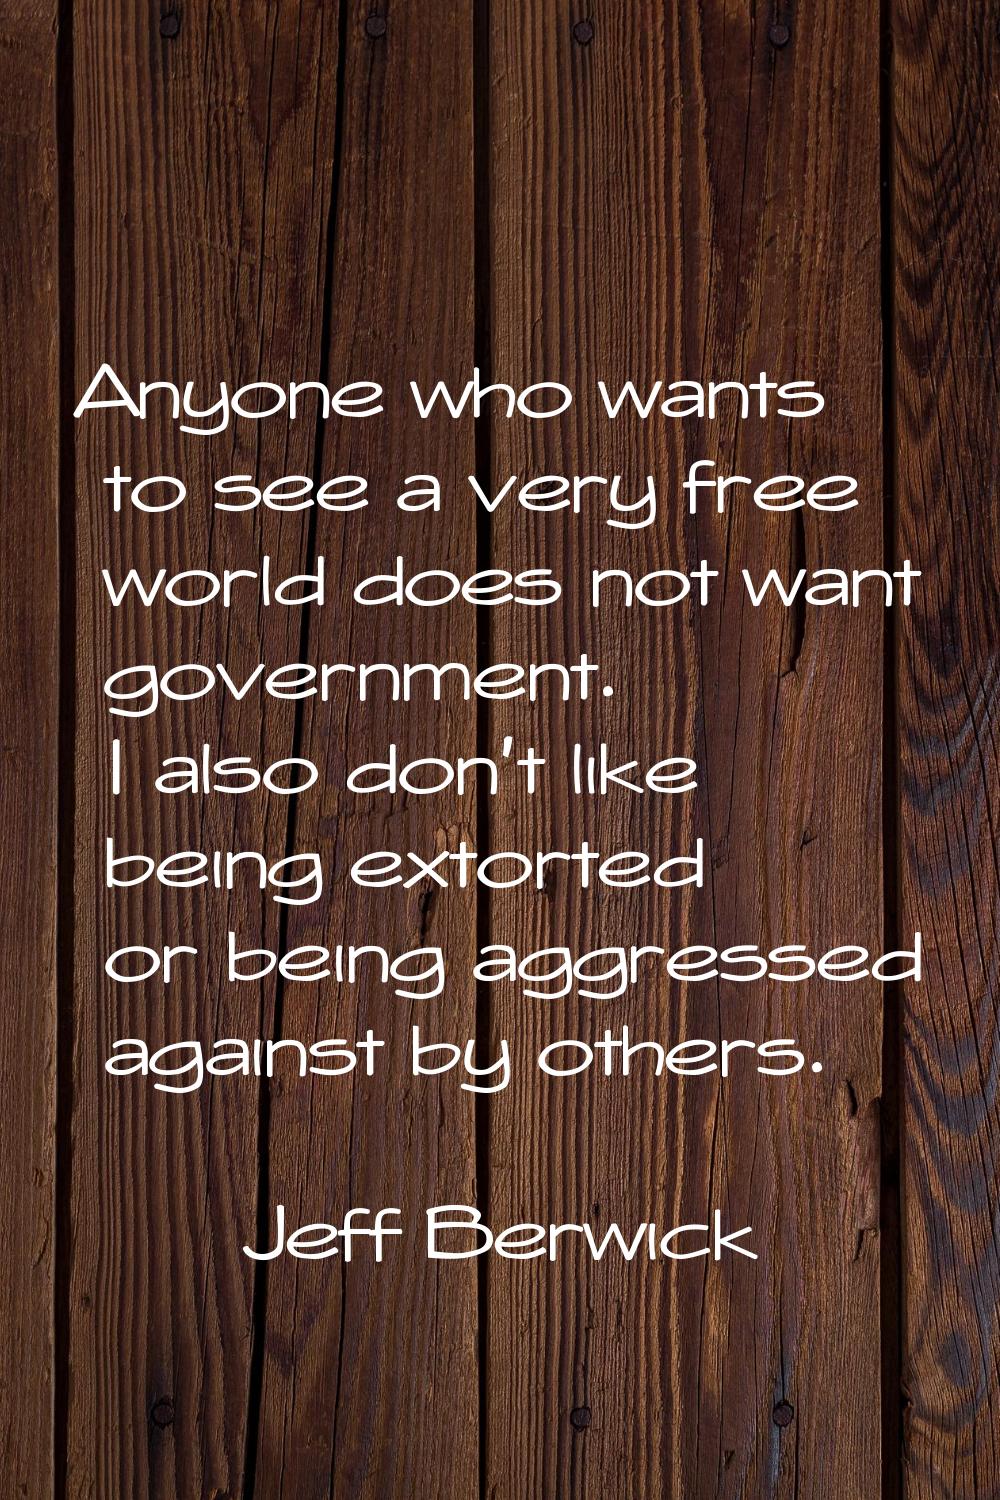 Anyone who wants to see a very free world does not want government. I also don't like being extorte